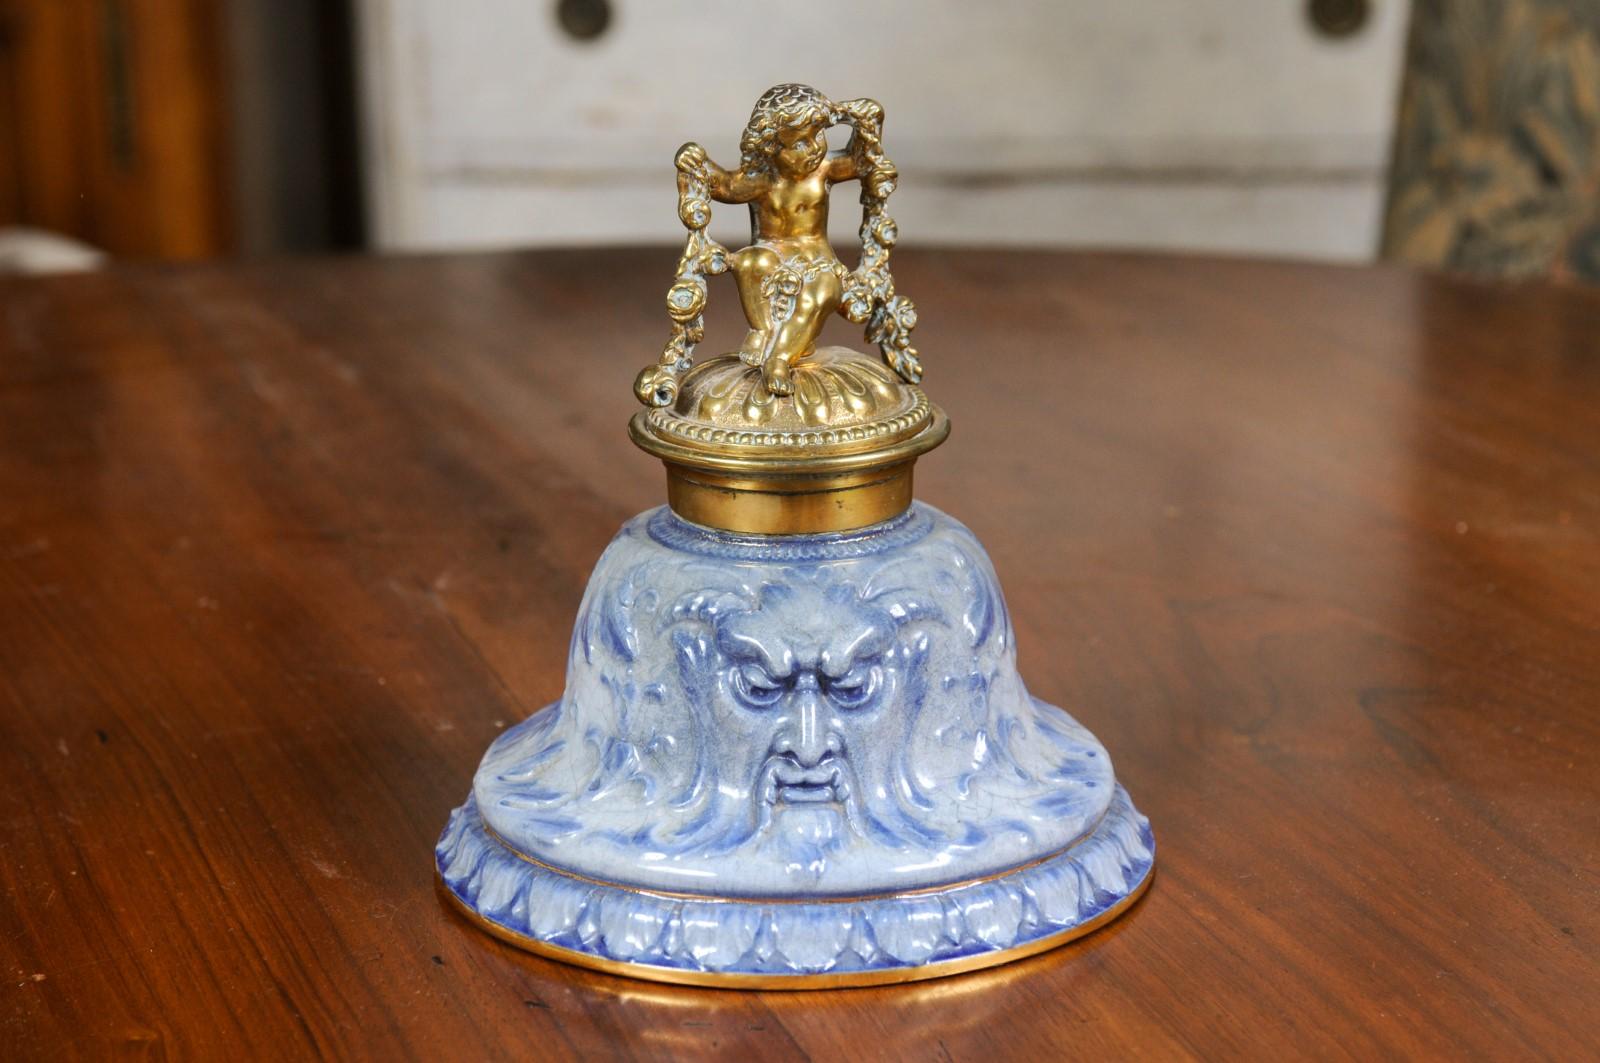 English Victorian Period 19th Century Porcelain Inkwell with Brass Putto Motif For Sale 4